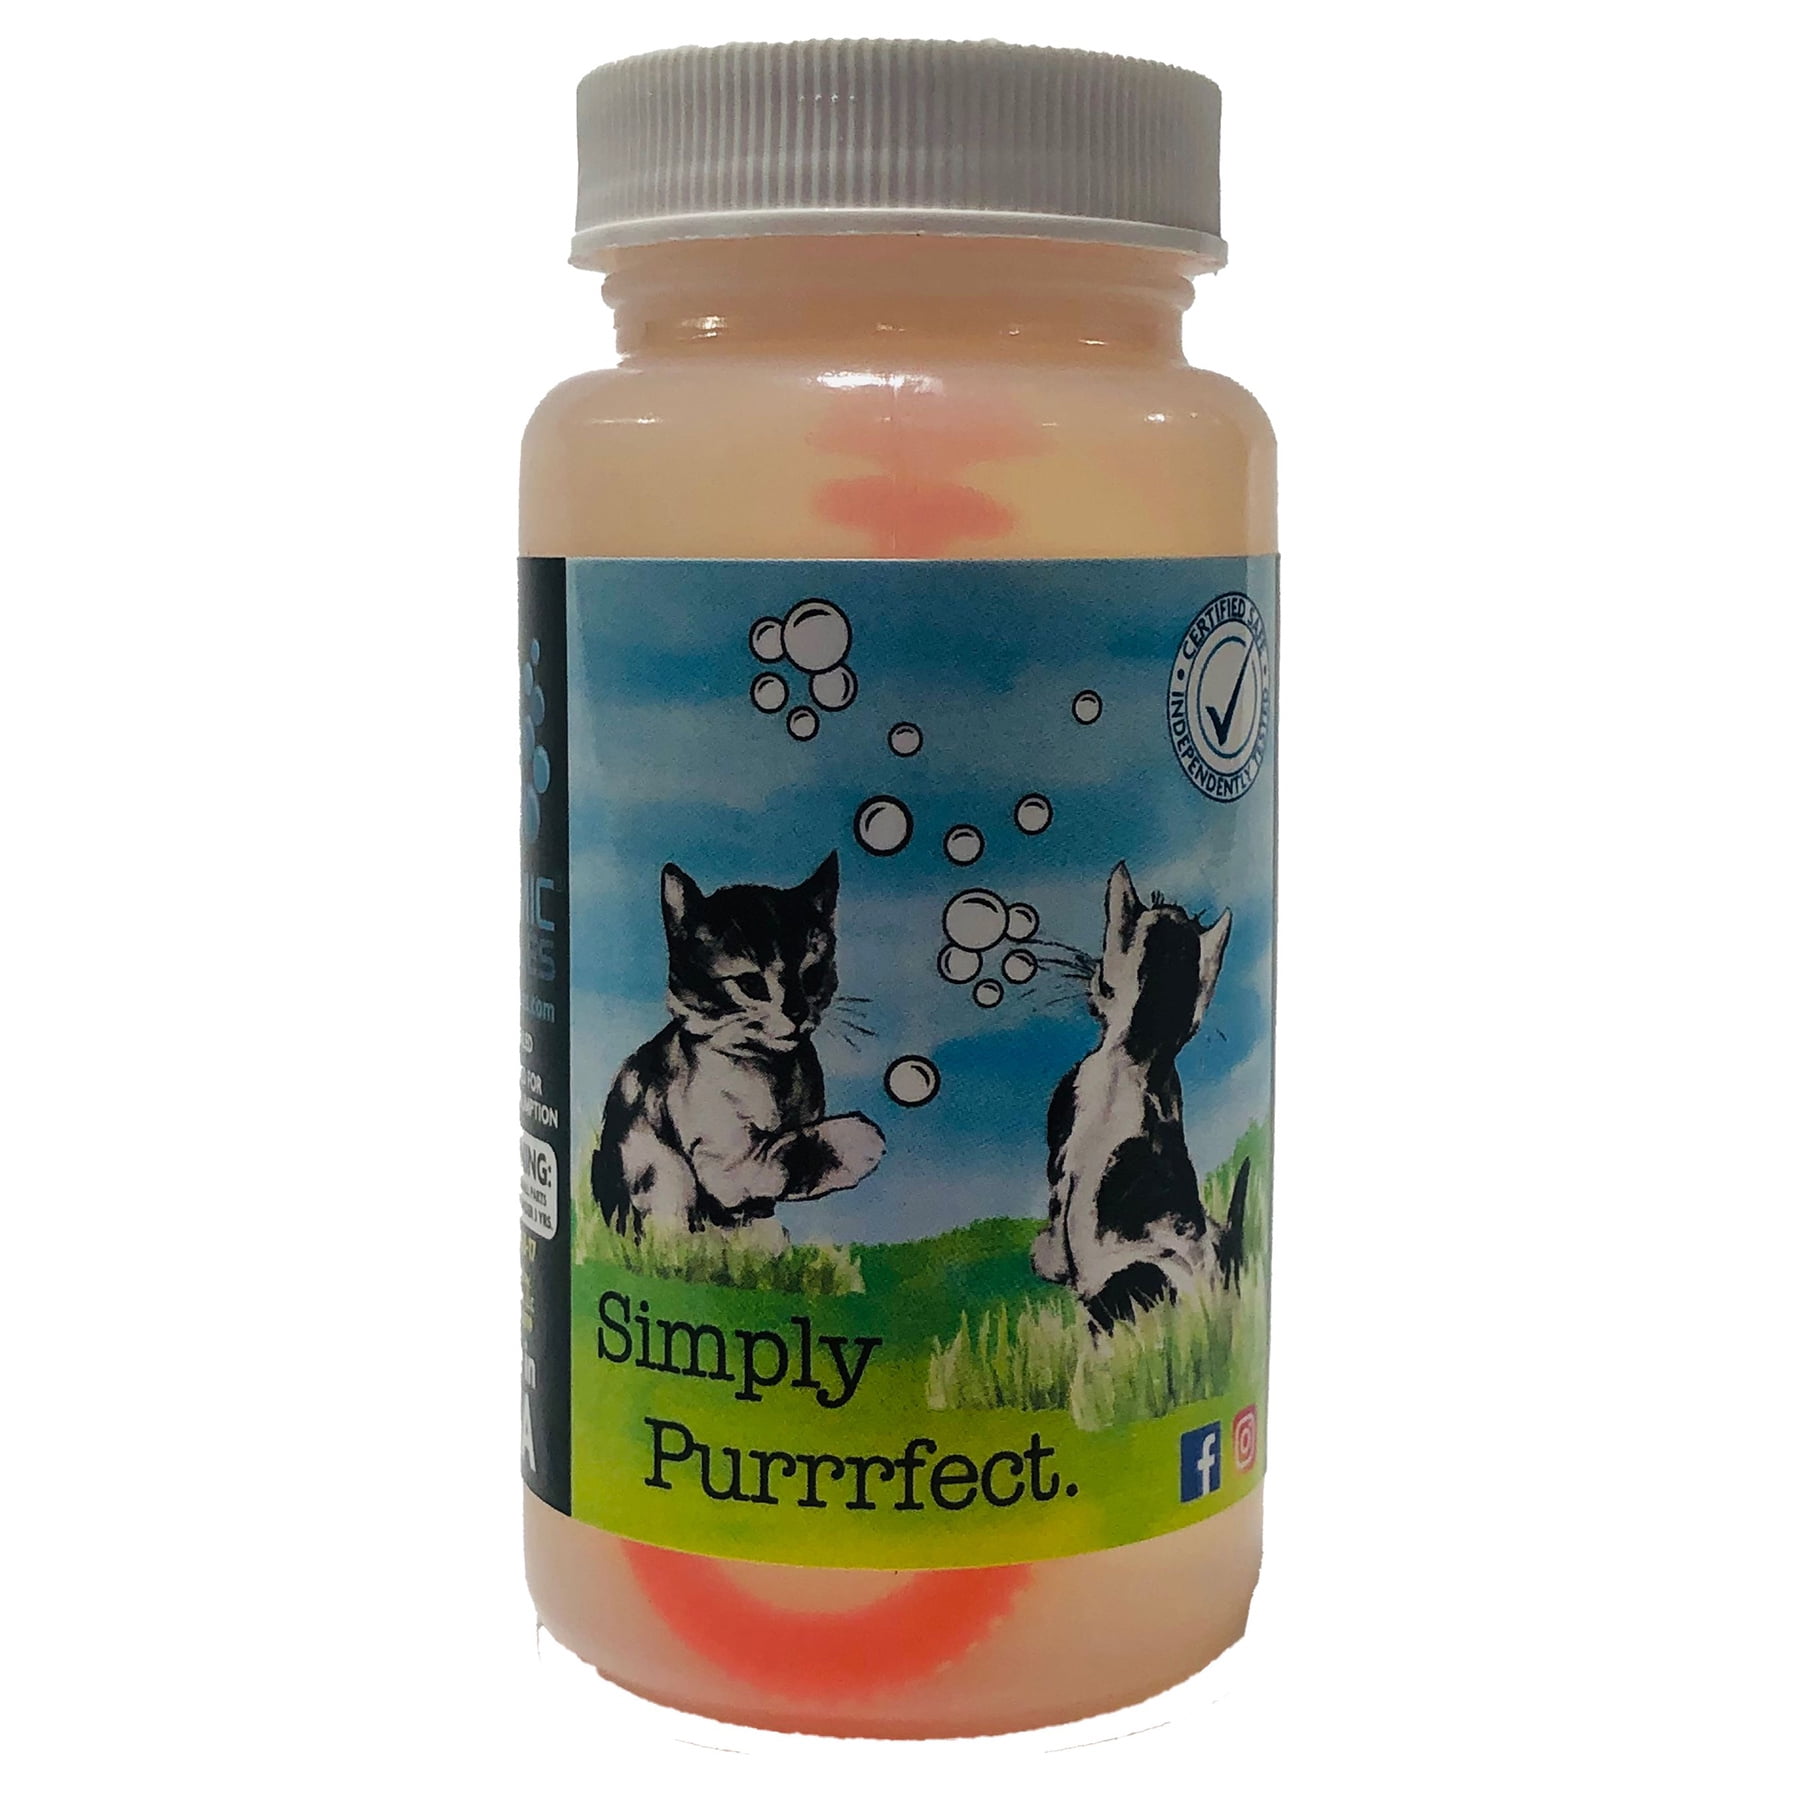 Kitty Love Bubbles, Catnip Scented Bubbles 4oz. Bottle-2 Pack for Cats